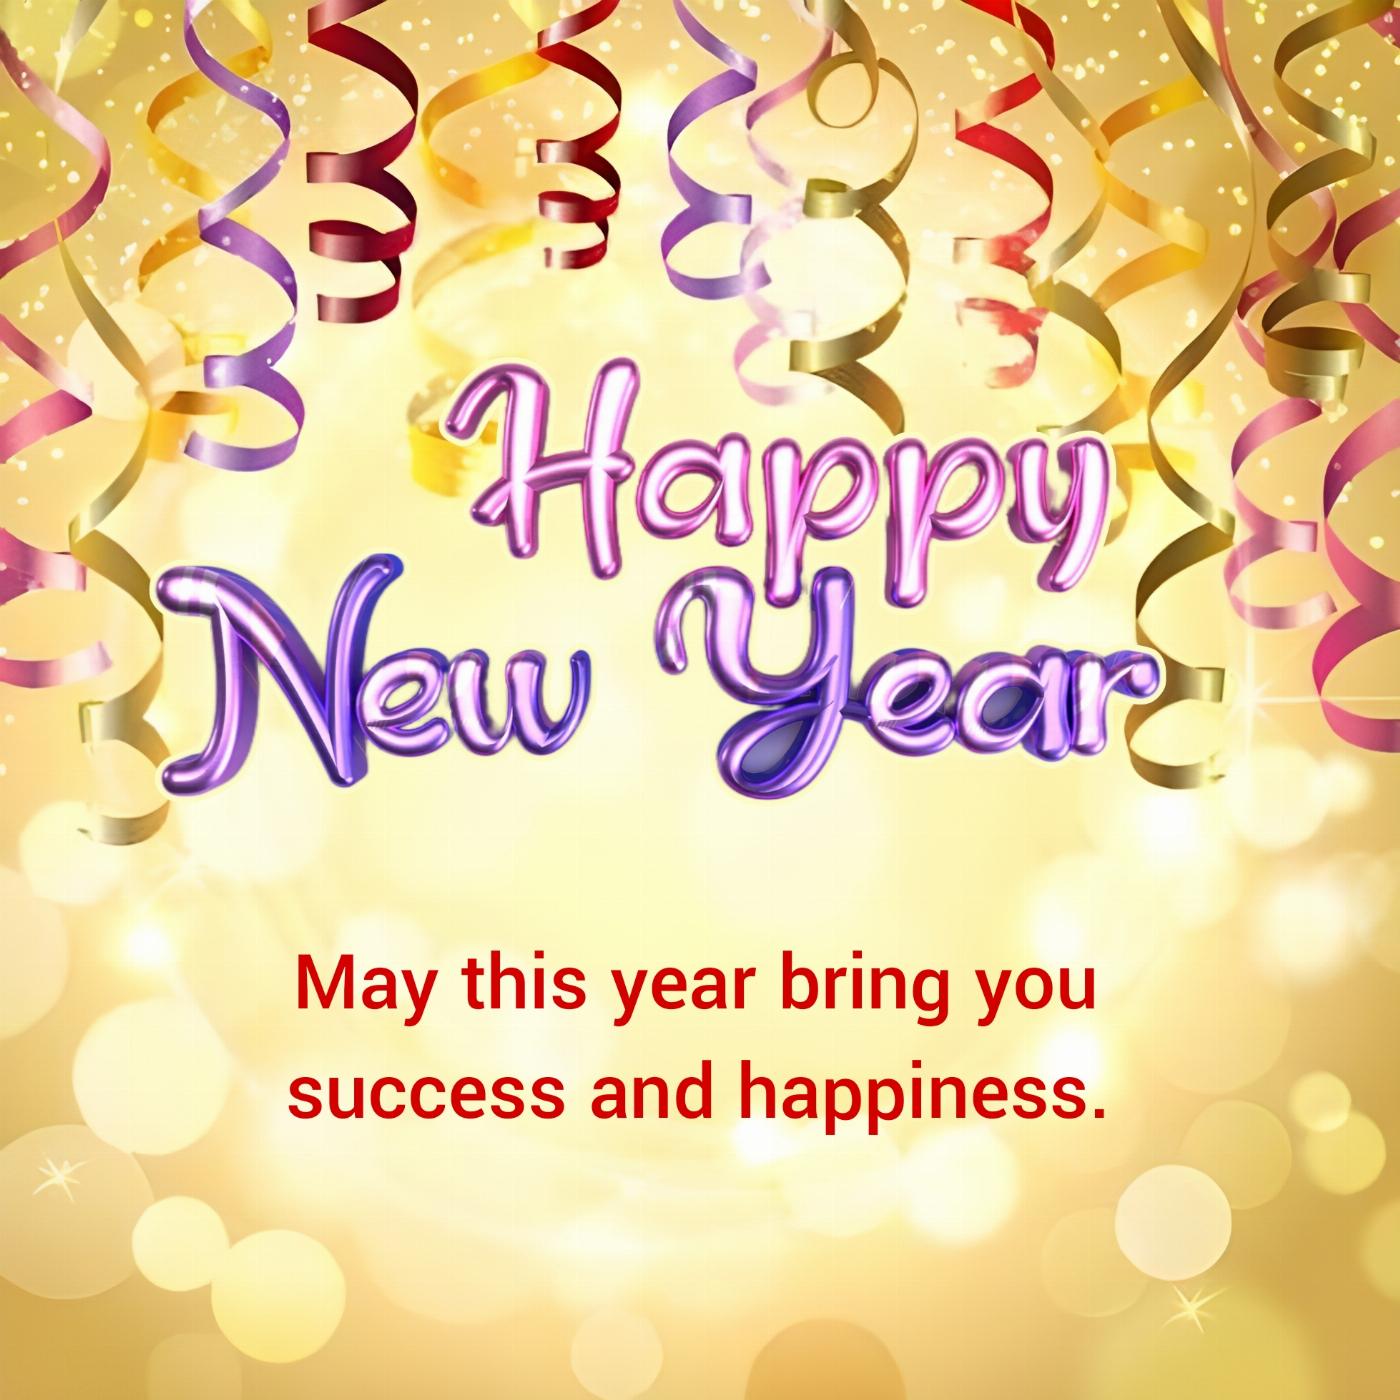 May this year bring you success and happiness